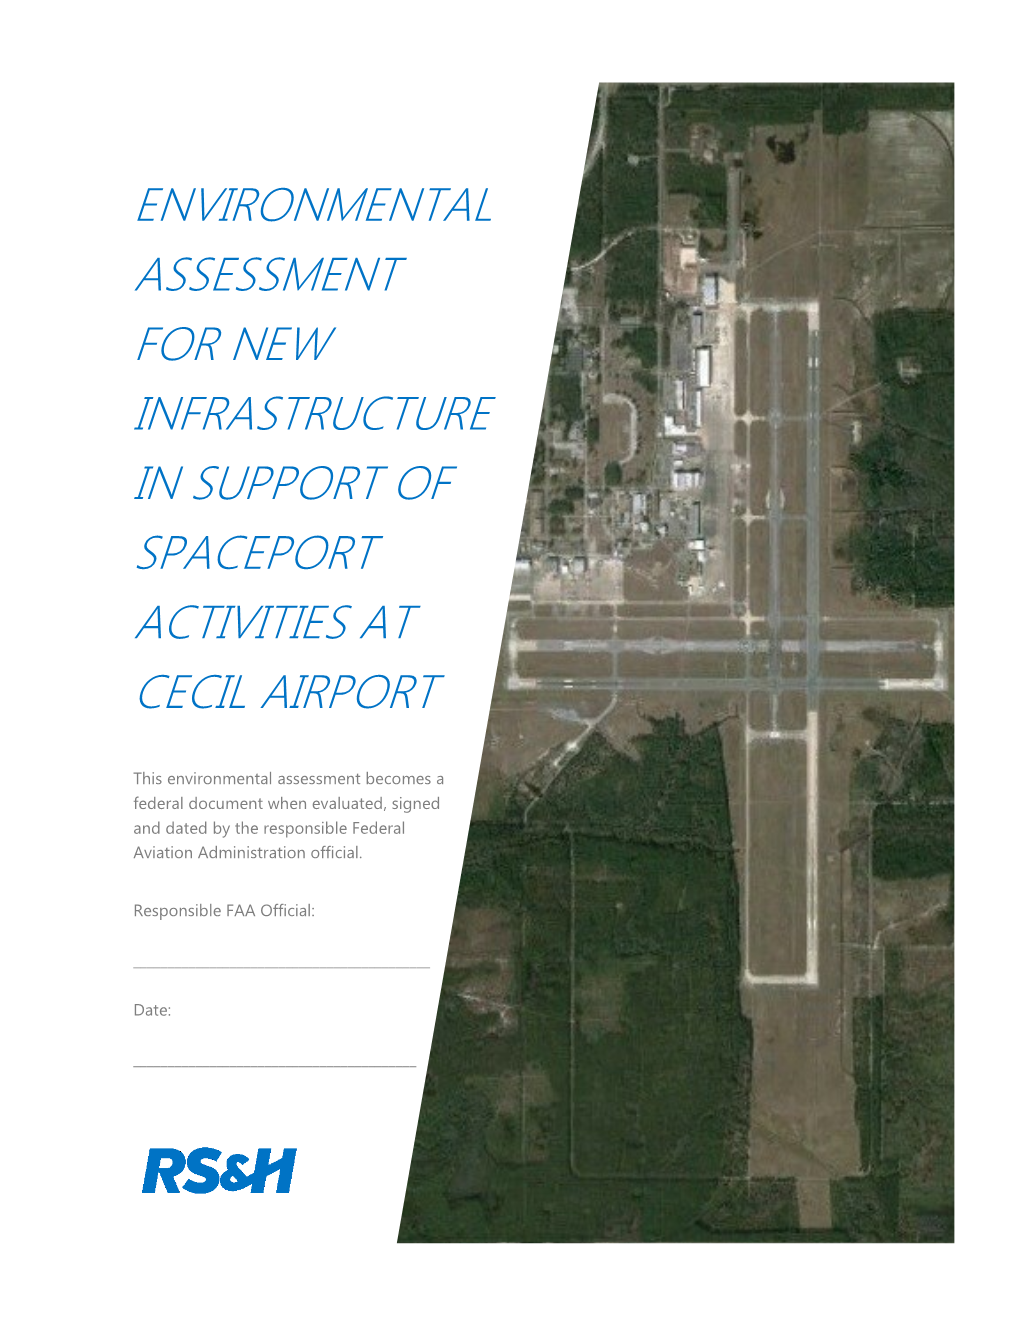 Environmental Assessment for New Infrastructure in Support of Spaceport Activities at Cecil Airport